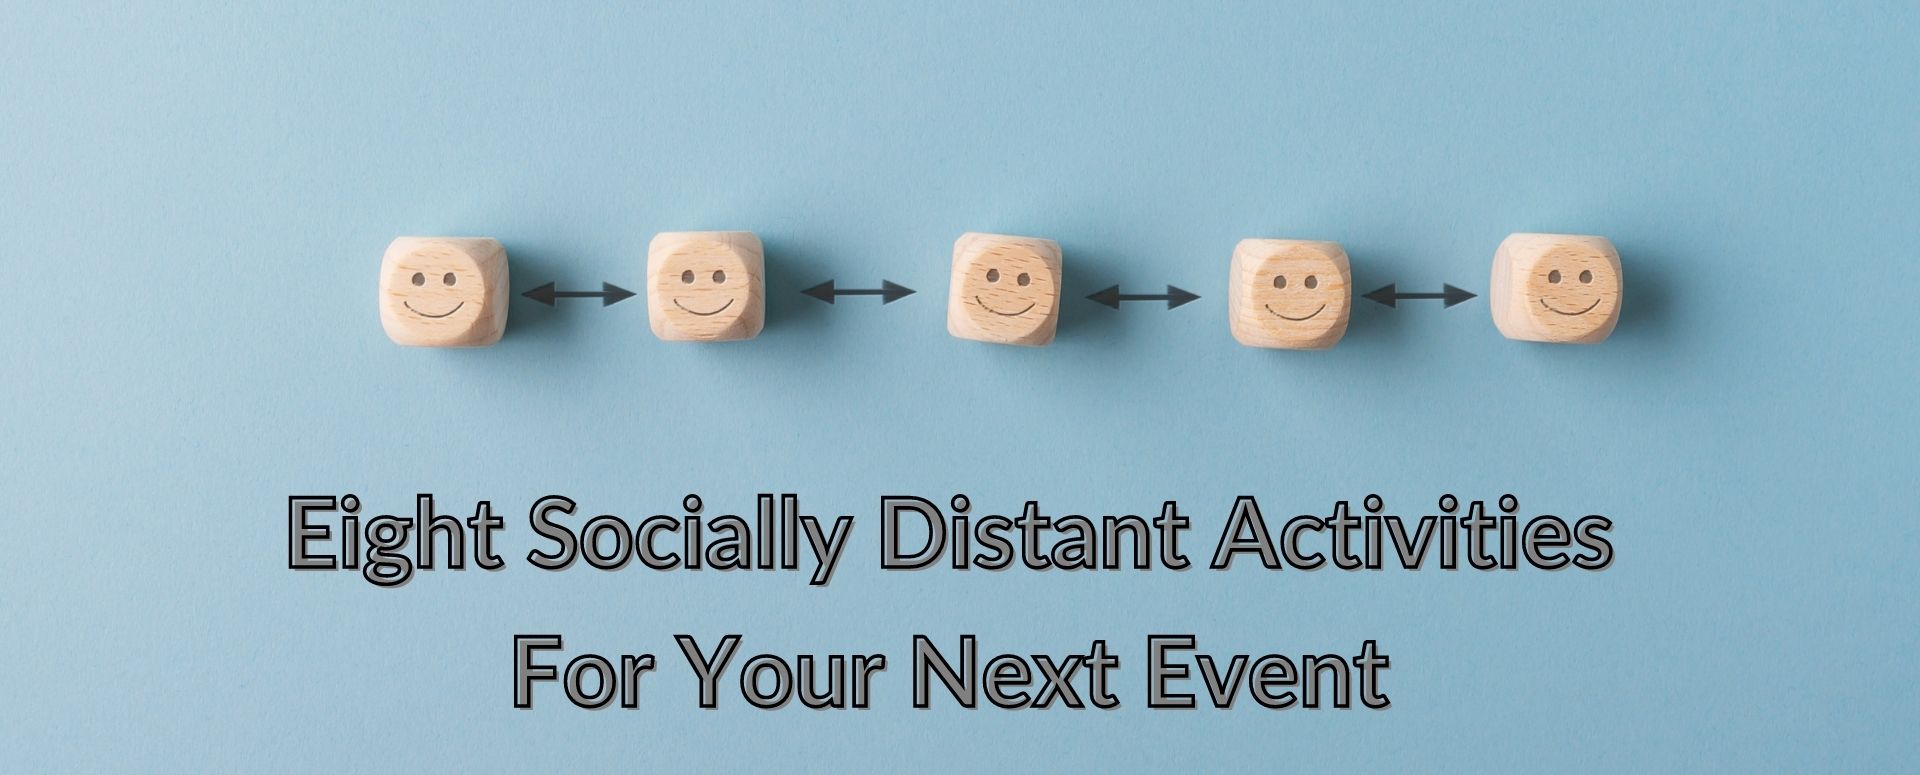 8 Event Ideas for Social Distancing